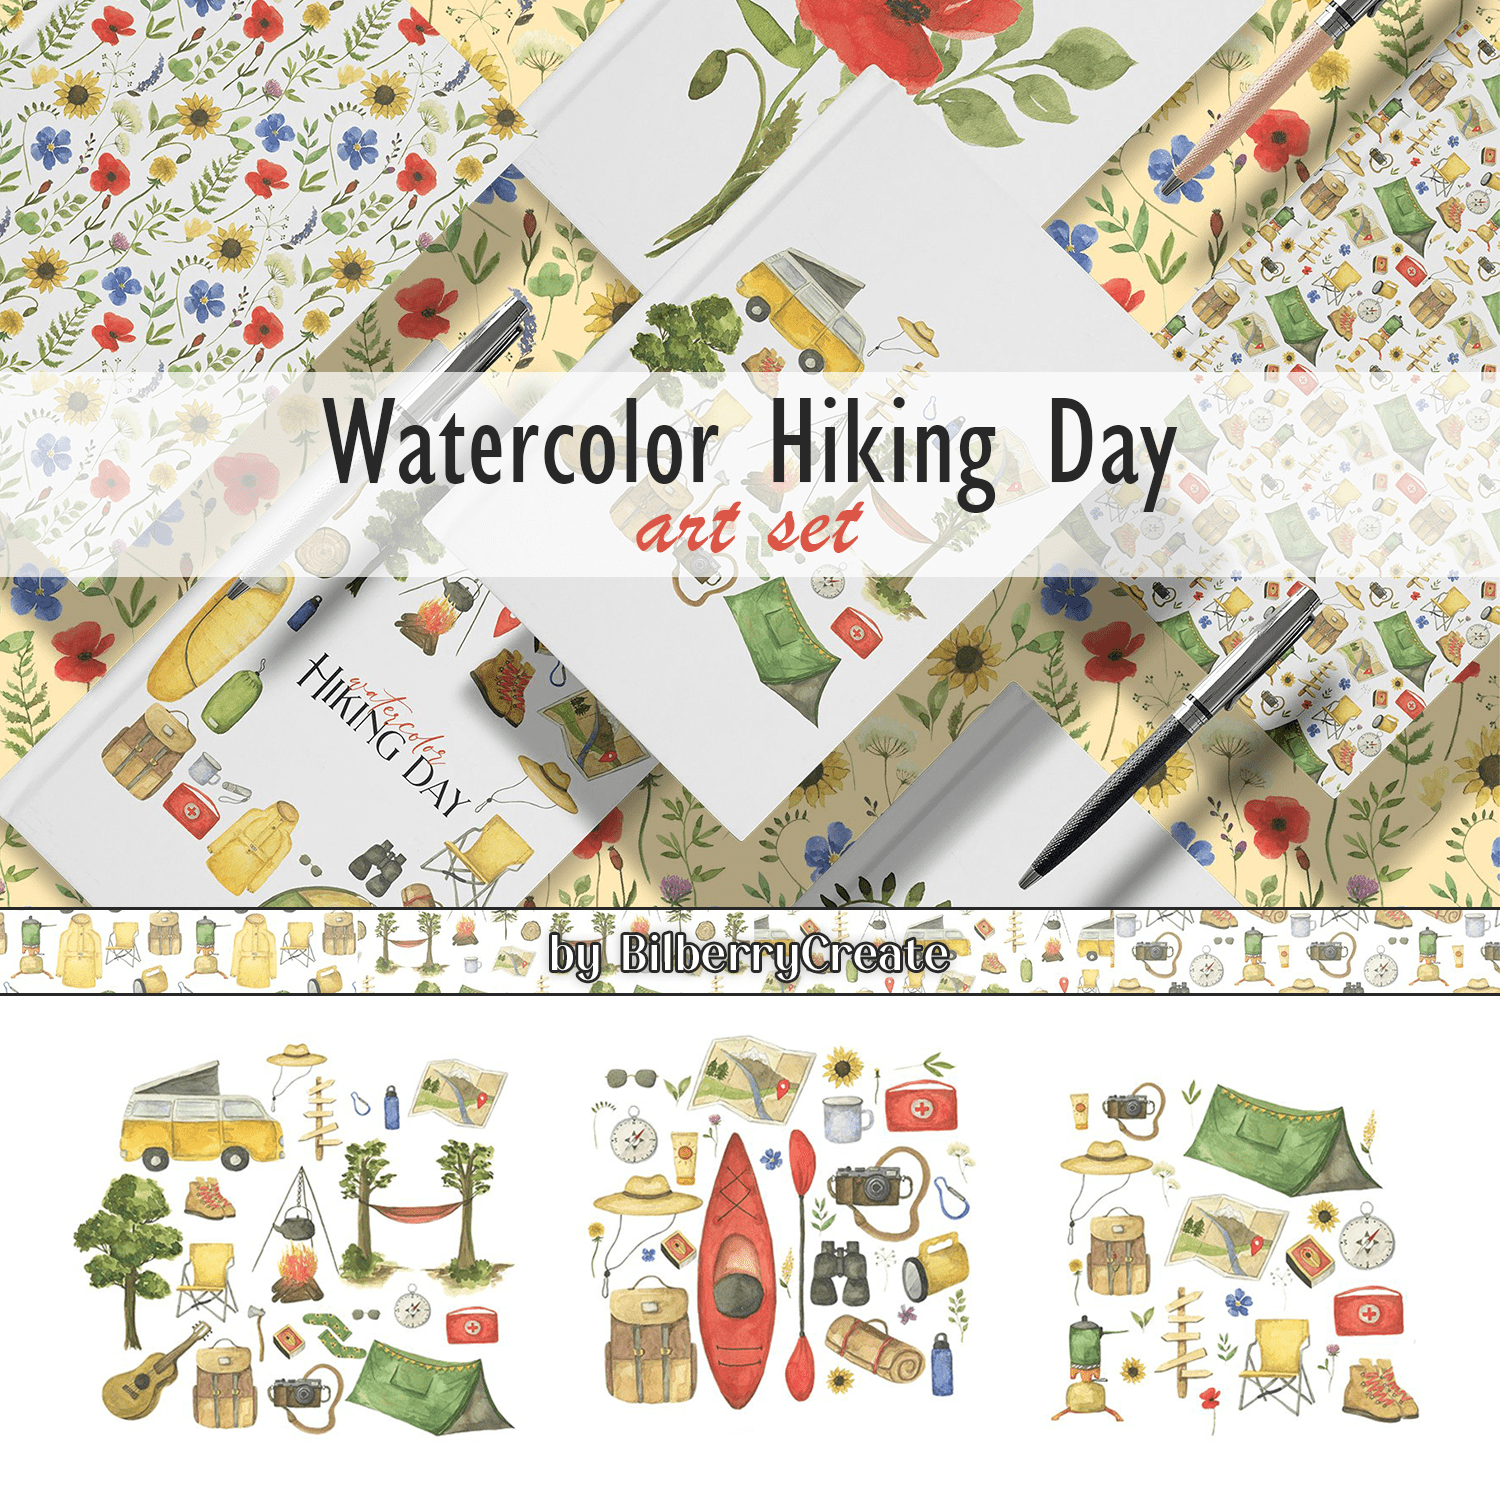 Watercolor Hiking Day art set created by BilberryCreate.